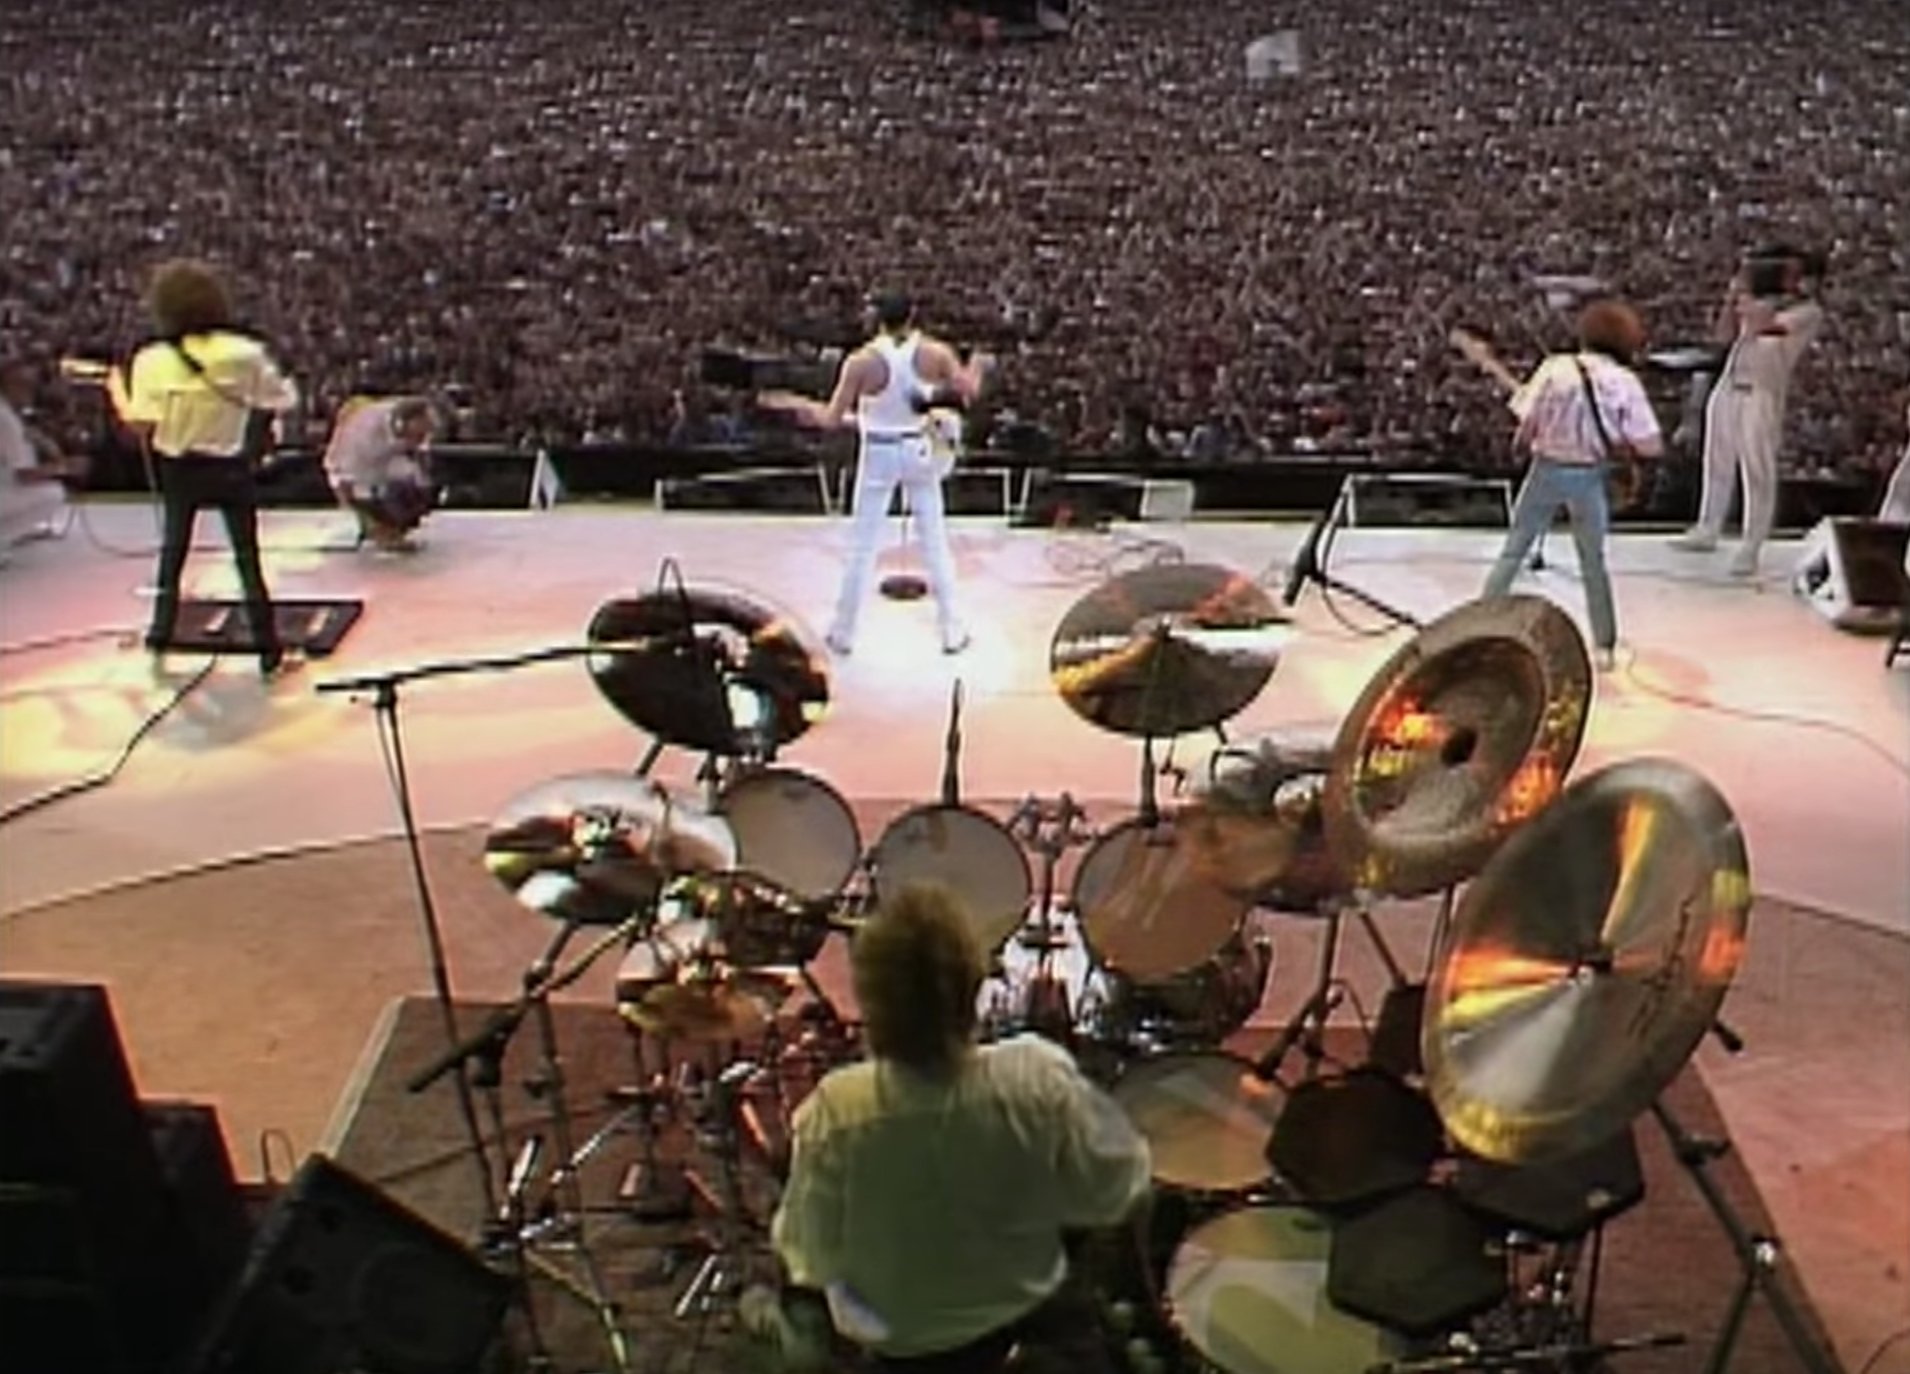 Back view of Queen performing at Wembley